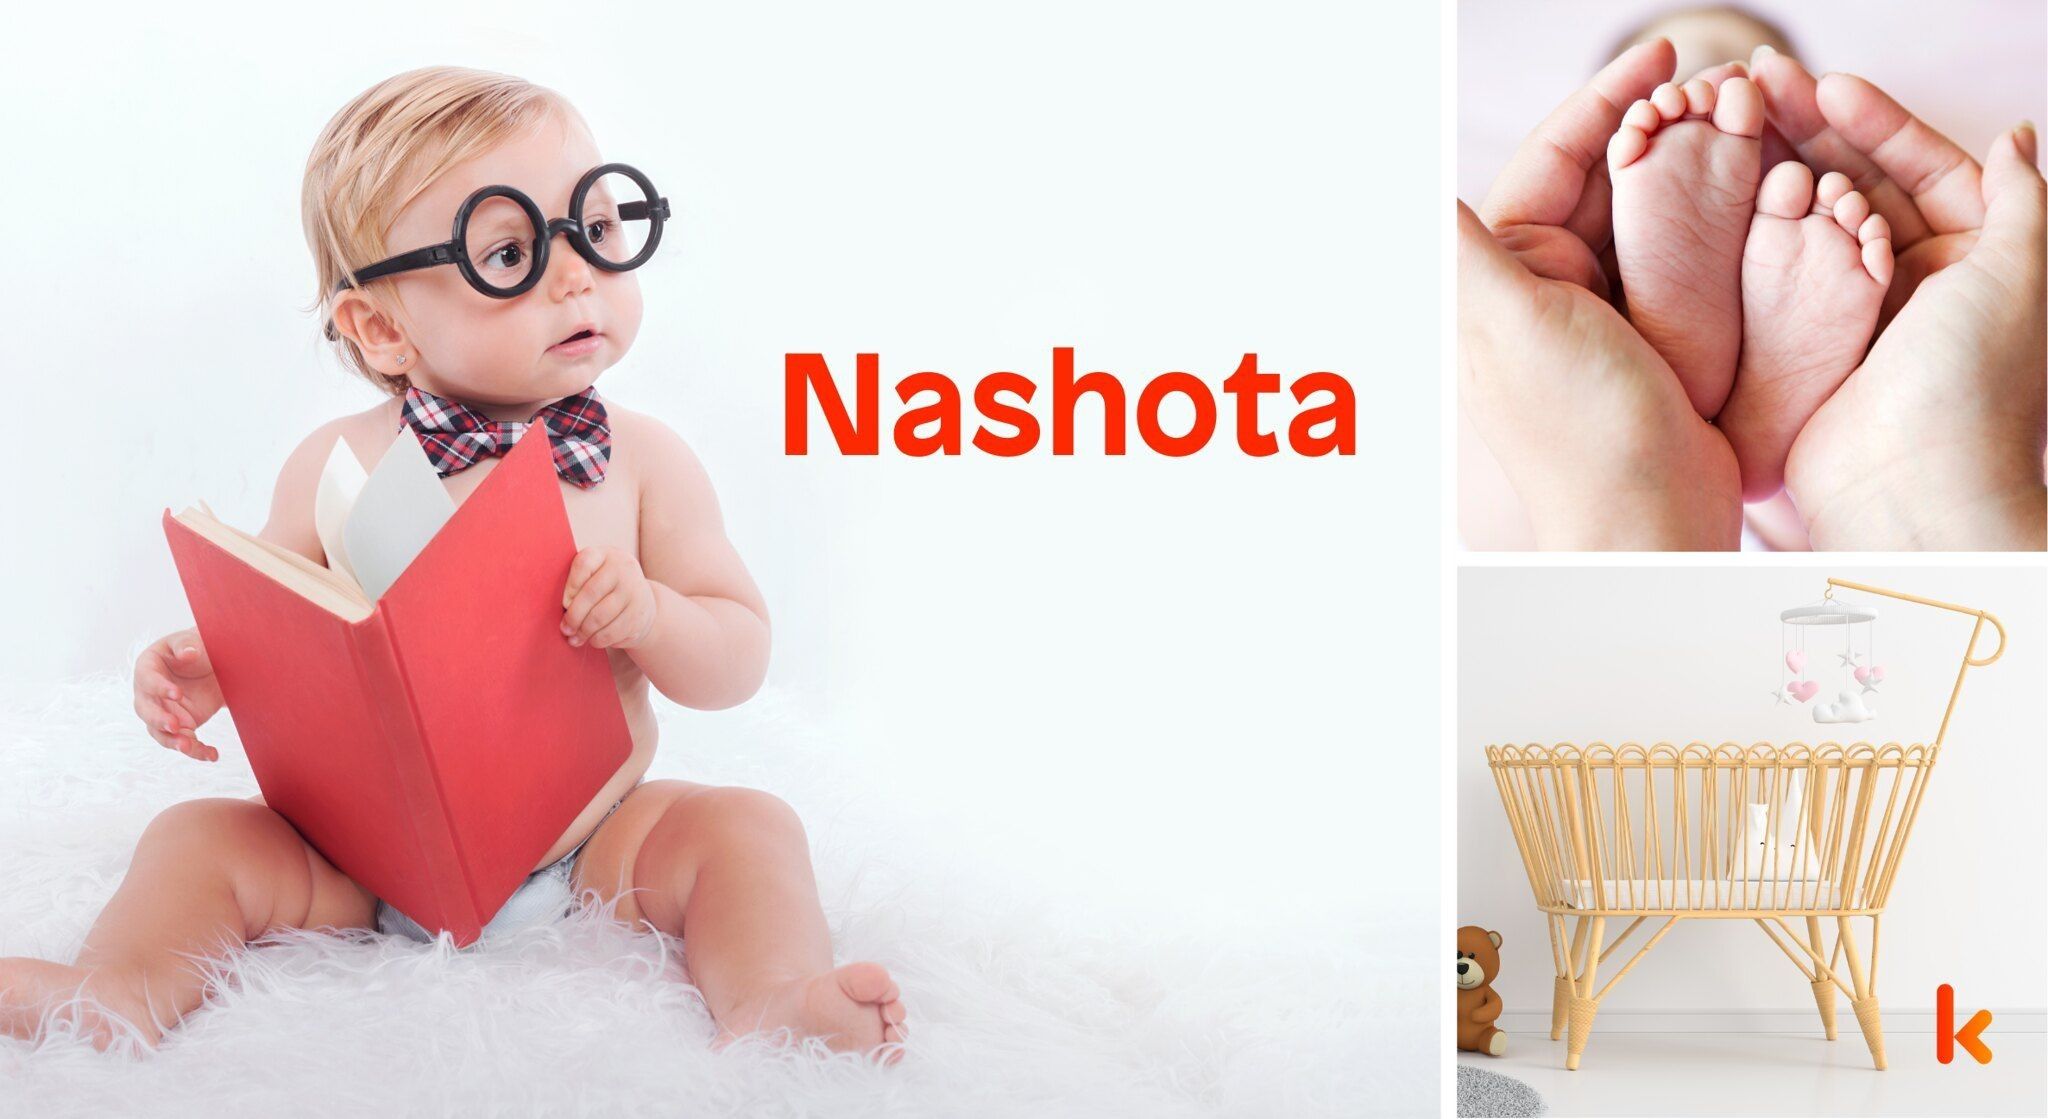 Meaning of the name Nashota